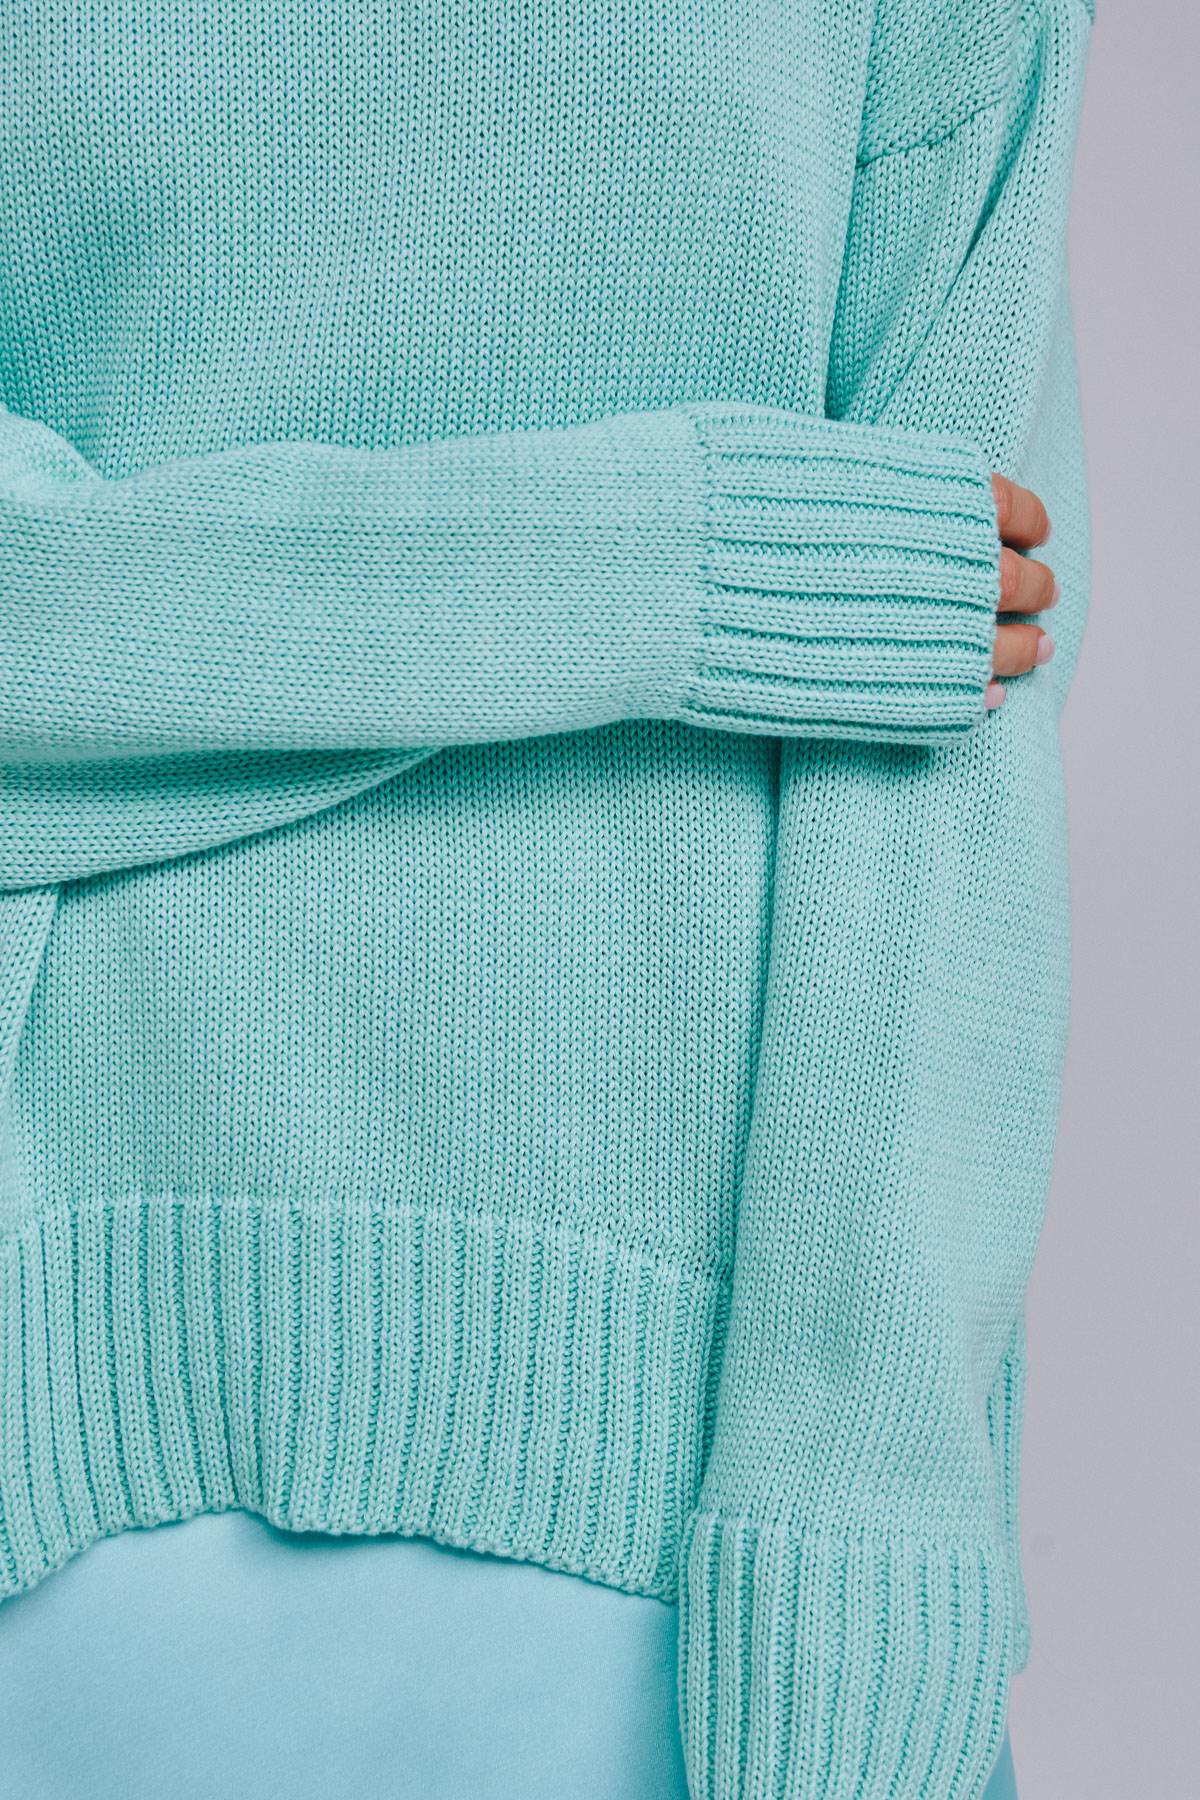 Mint knitted cotton sweater, photo 6